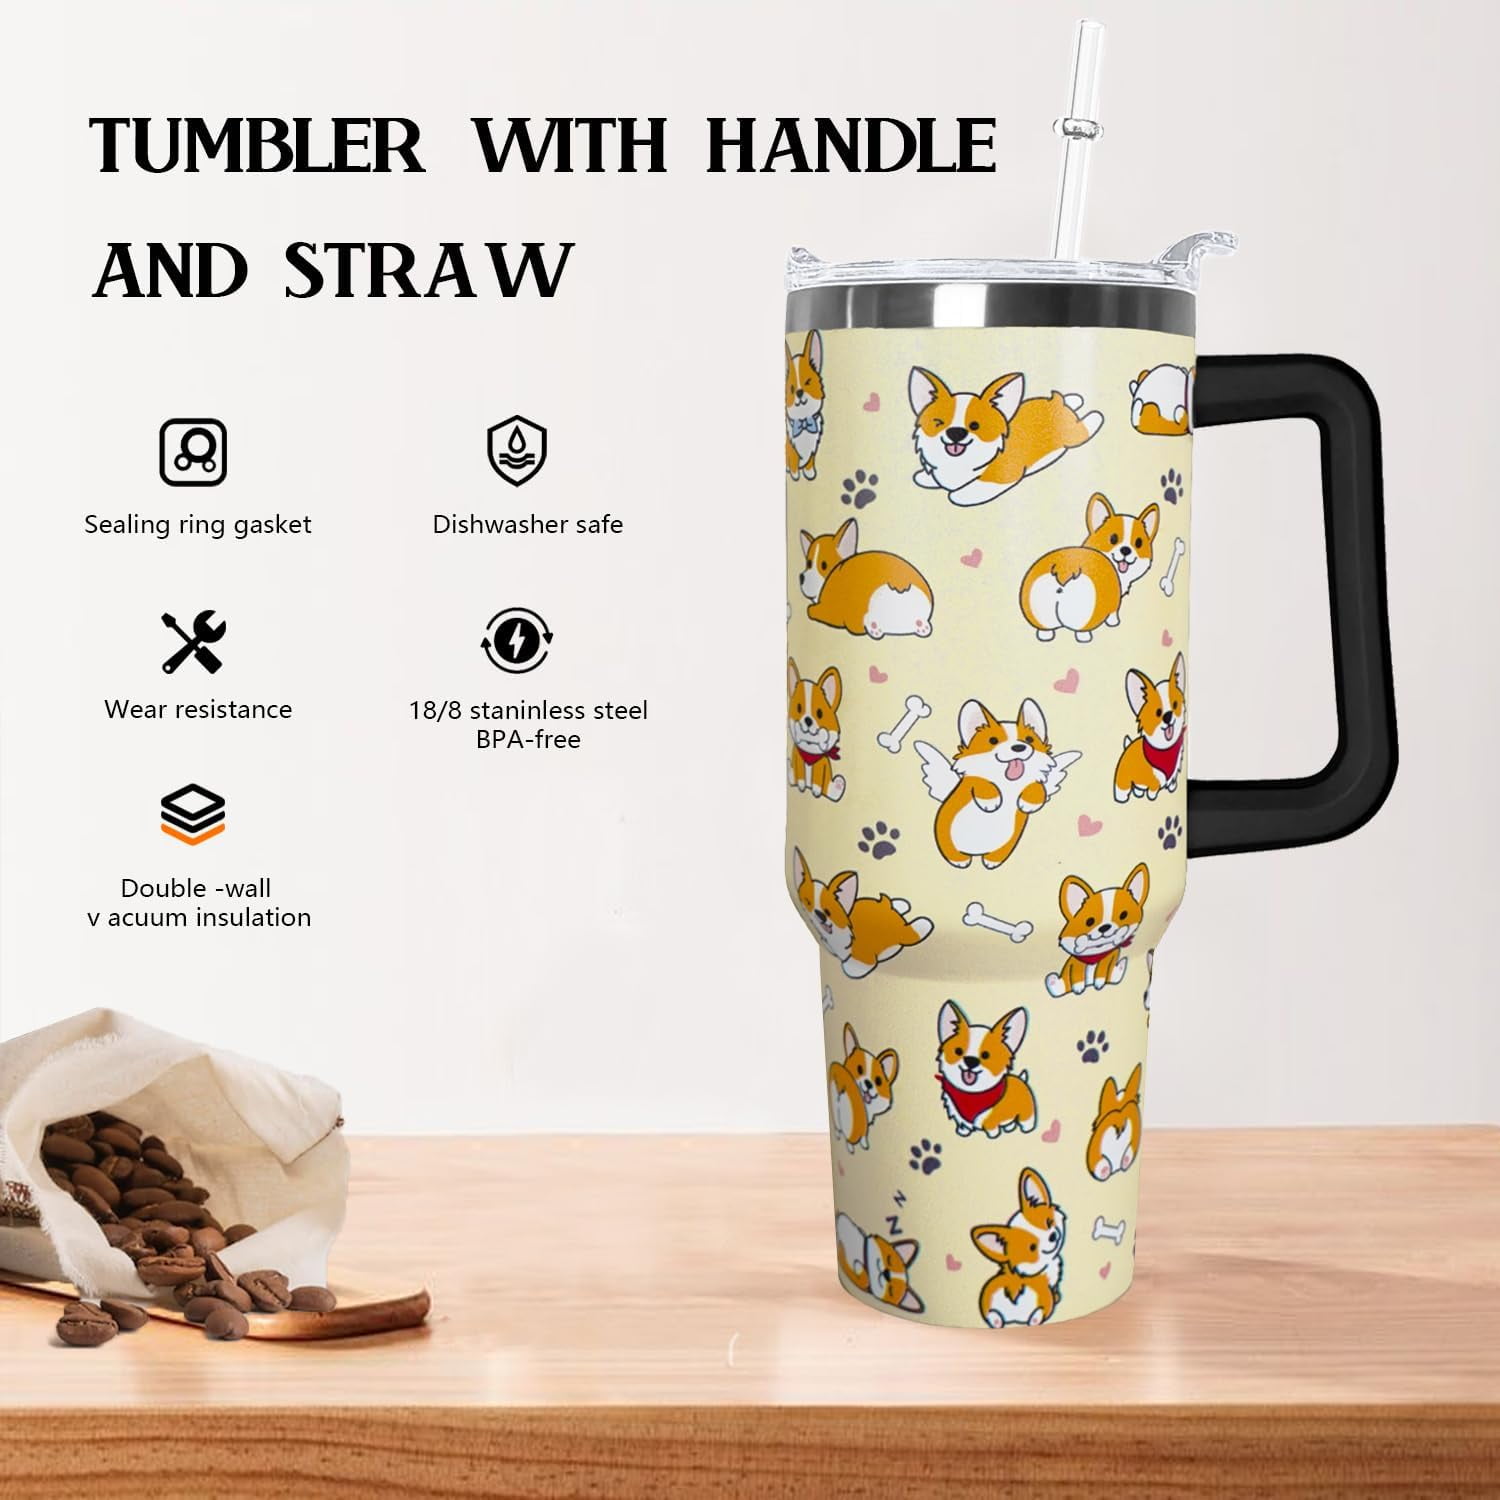 Ceovfoi 40 oz Camo Tumbler with Handle Lid and Straw, Hunting  Gifts for Men Women,Camo Tumbler Travel Coffee Cup Mug Water Botter:  Tumblers & Water Glasses